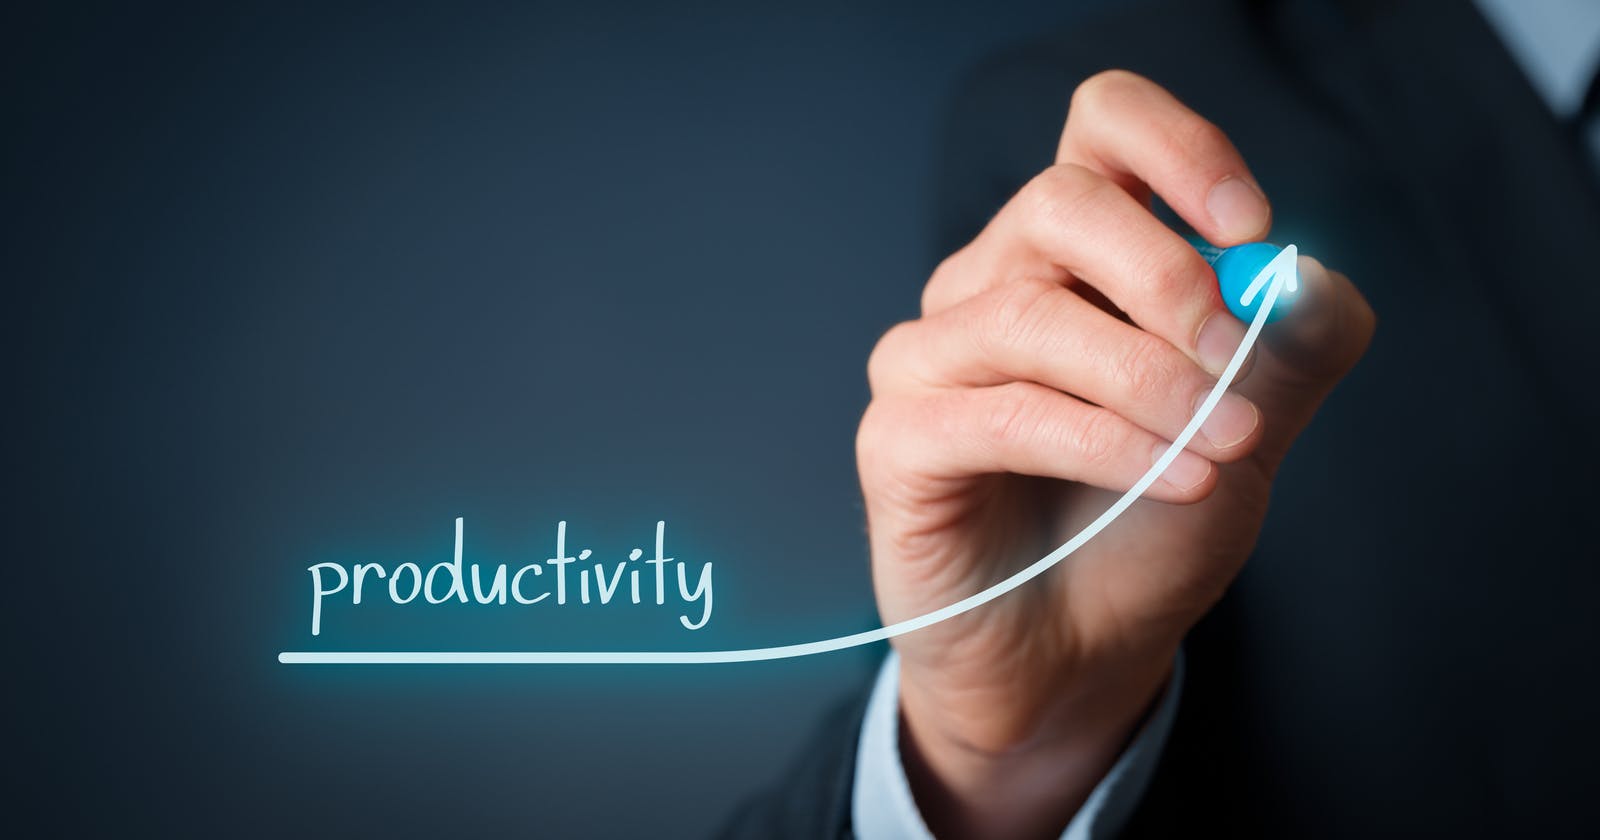 "Unlocking Peak Productivity: Strategies for Getting More Done in Less Time"